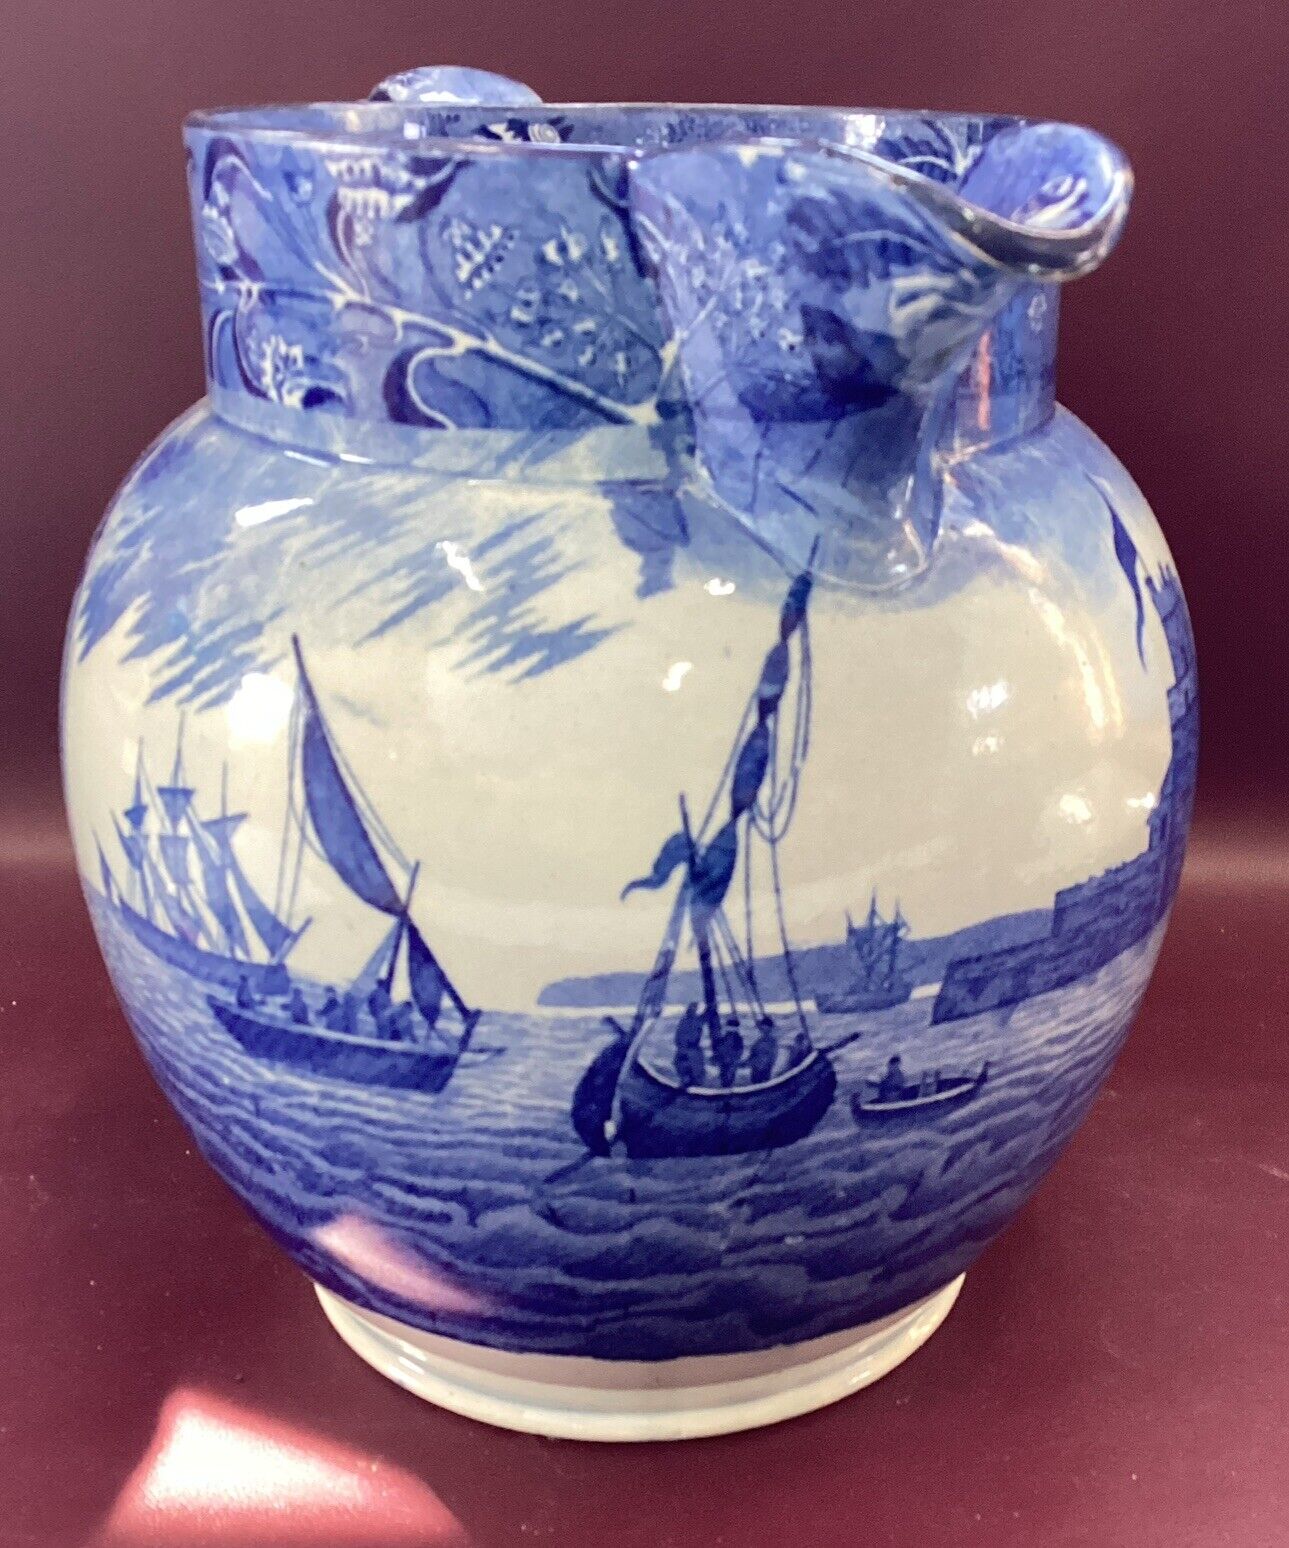 Rare Historical Blue Staffordshire “Shipping Series” 8.5” Pitcher Pearlware